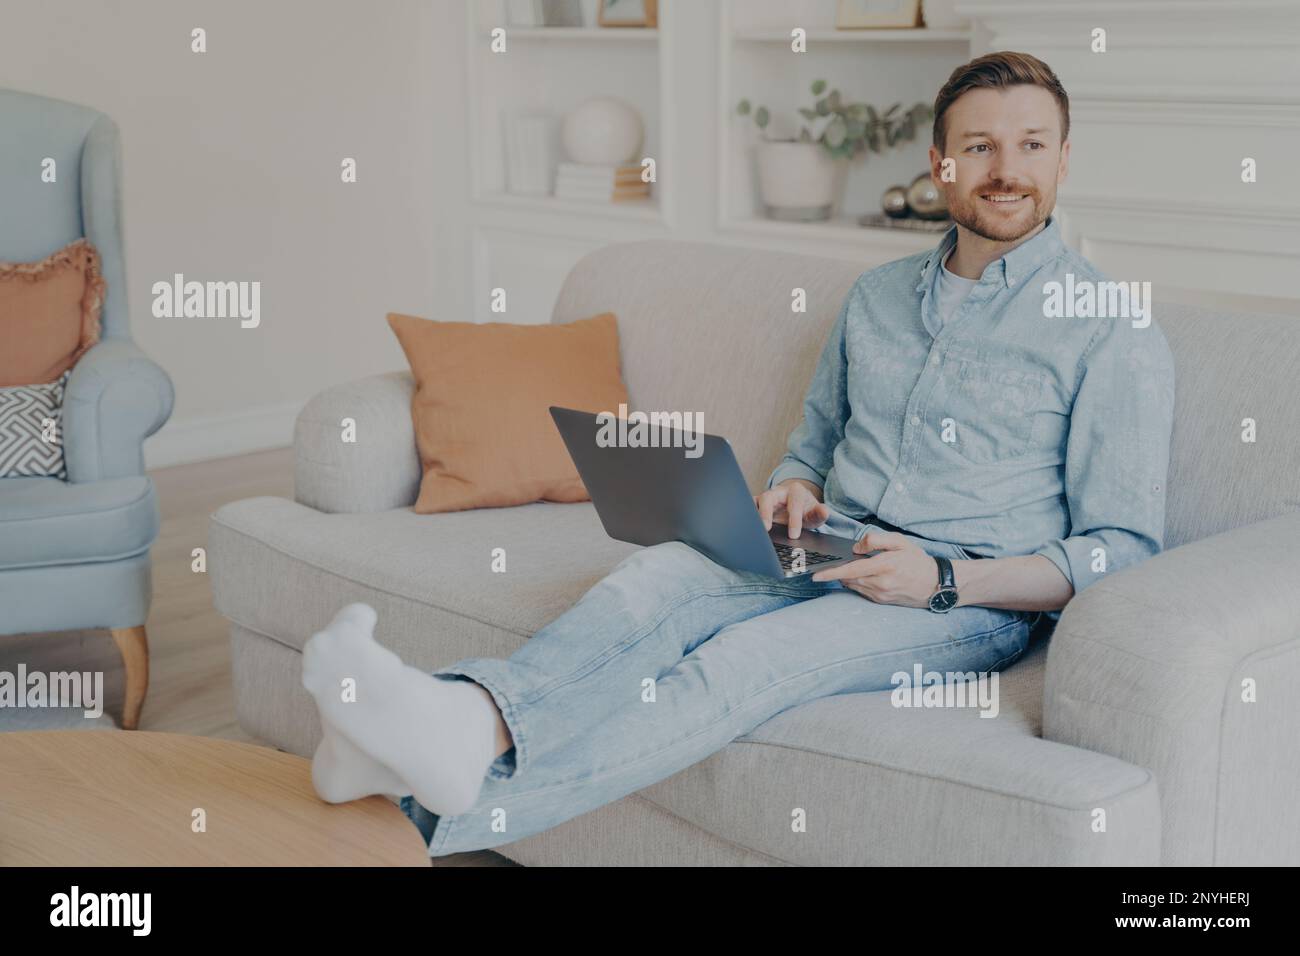 Young man with stubble surfing web on his laptop while sitting on couch, resting legs on coffee table, relaxing after hard work session on project, ta Stock Photo